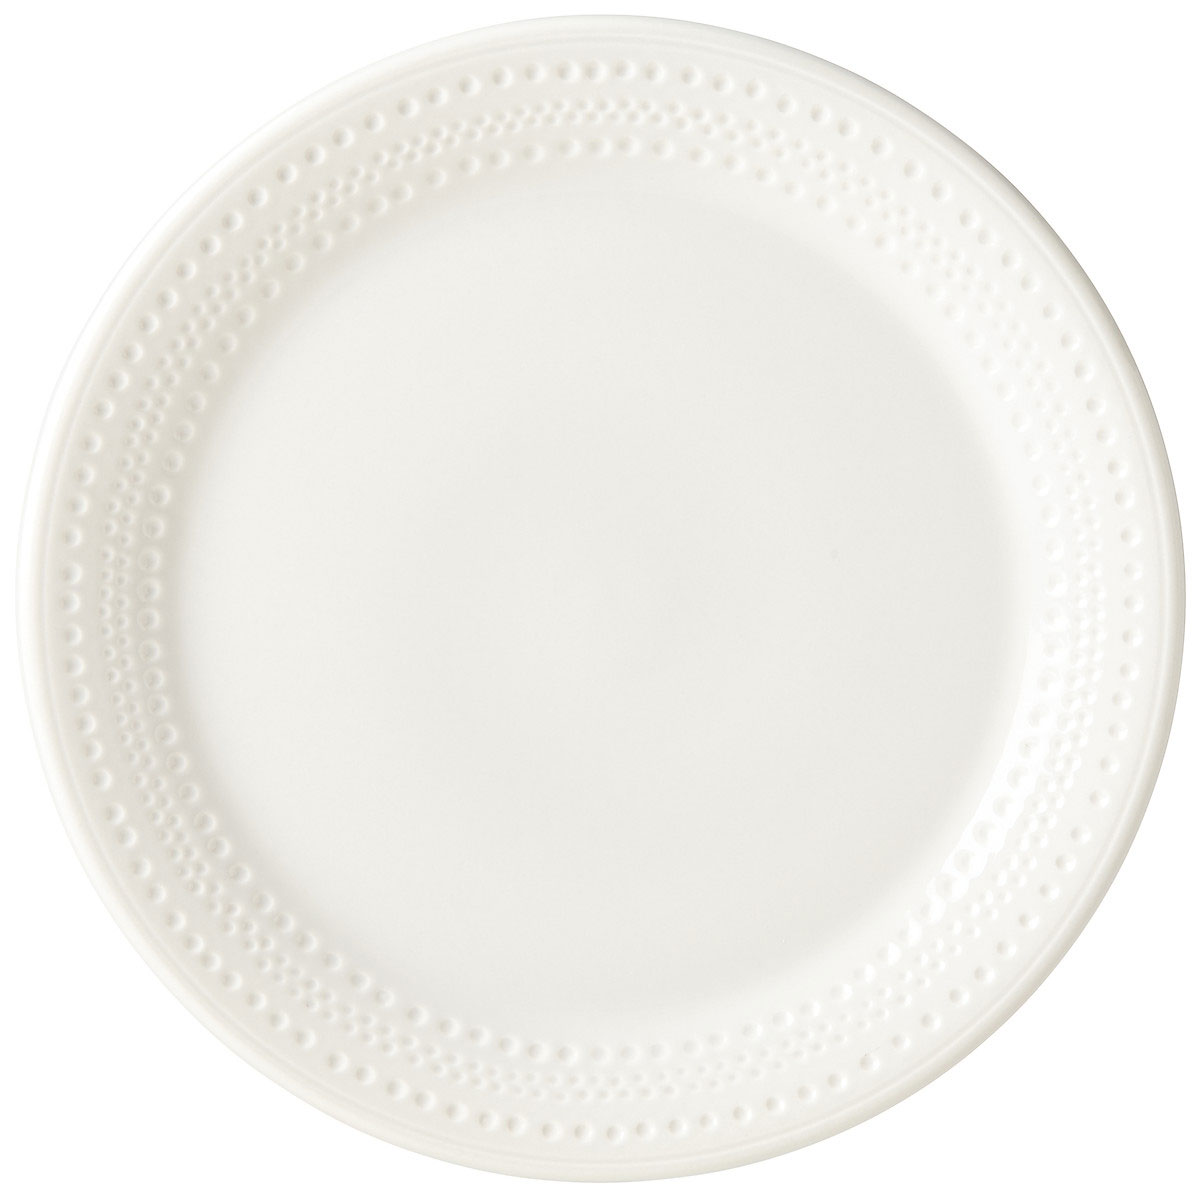 Kate Spade by Lenox Willow Drive Cream Dinner Plate, Single